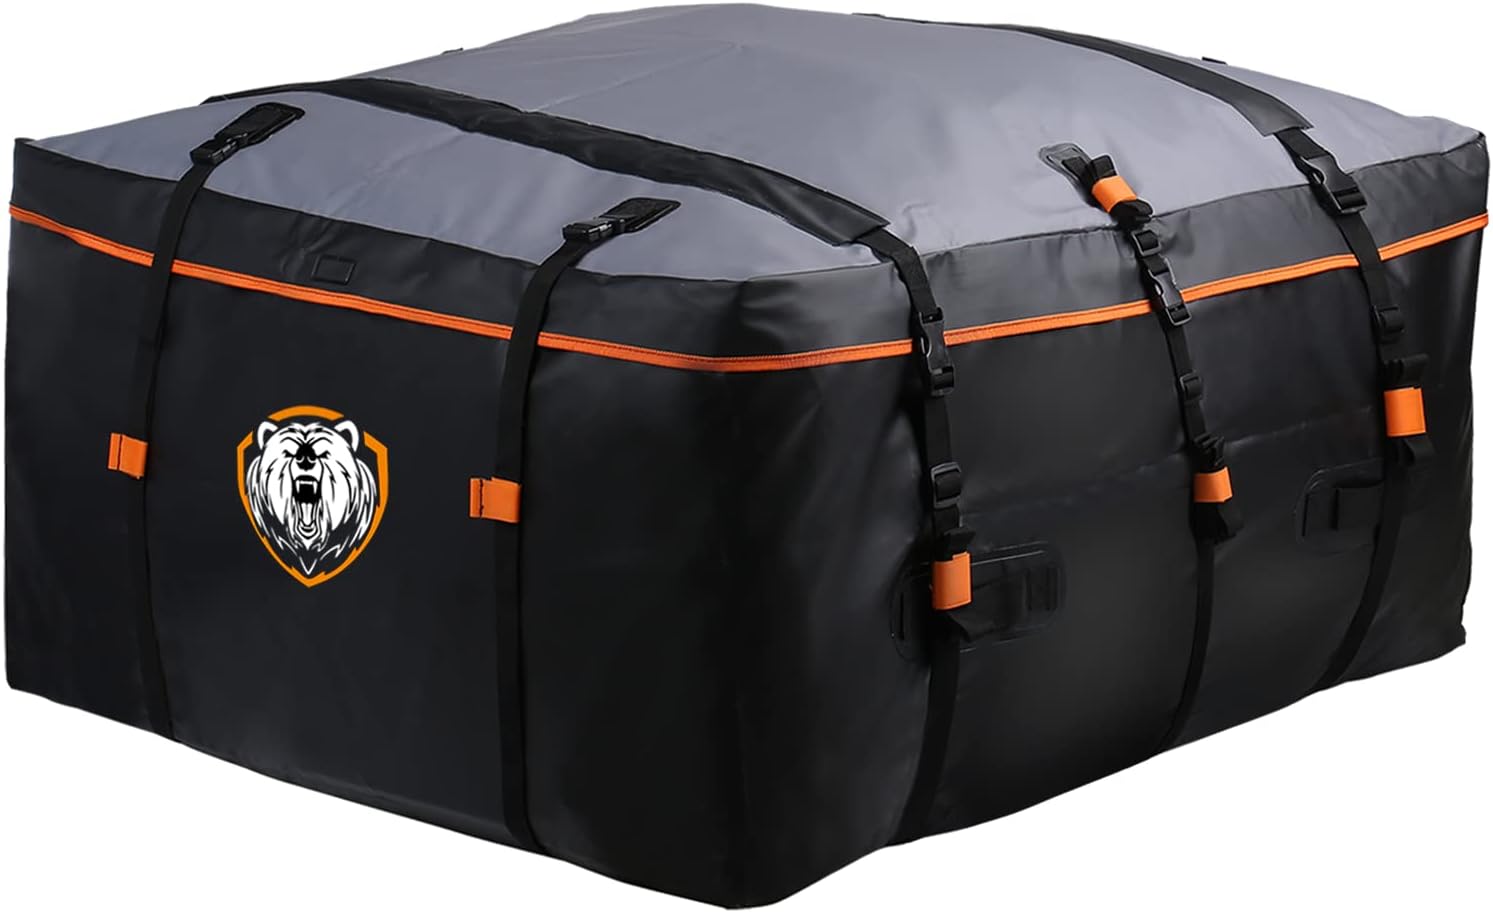 SUNER POWER Waterproof 15 Cubic Feet Rooftop Cargo Carrier PRO - Heavy Duty Roof Top Luggage Storage Bag with Anti-Slip Mat + 10 Reinforced